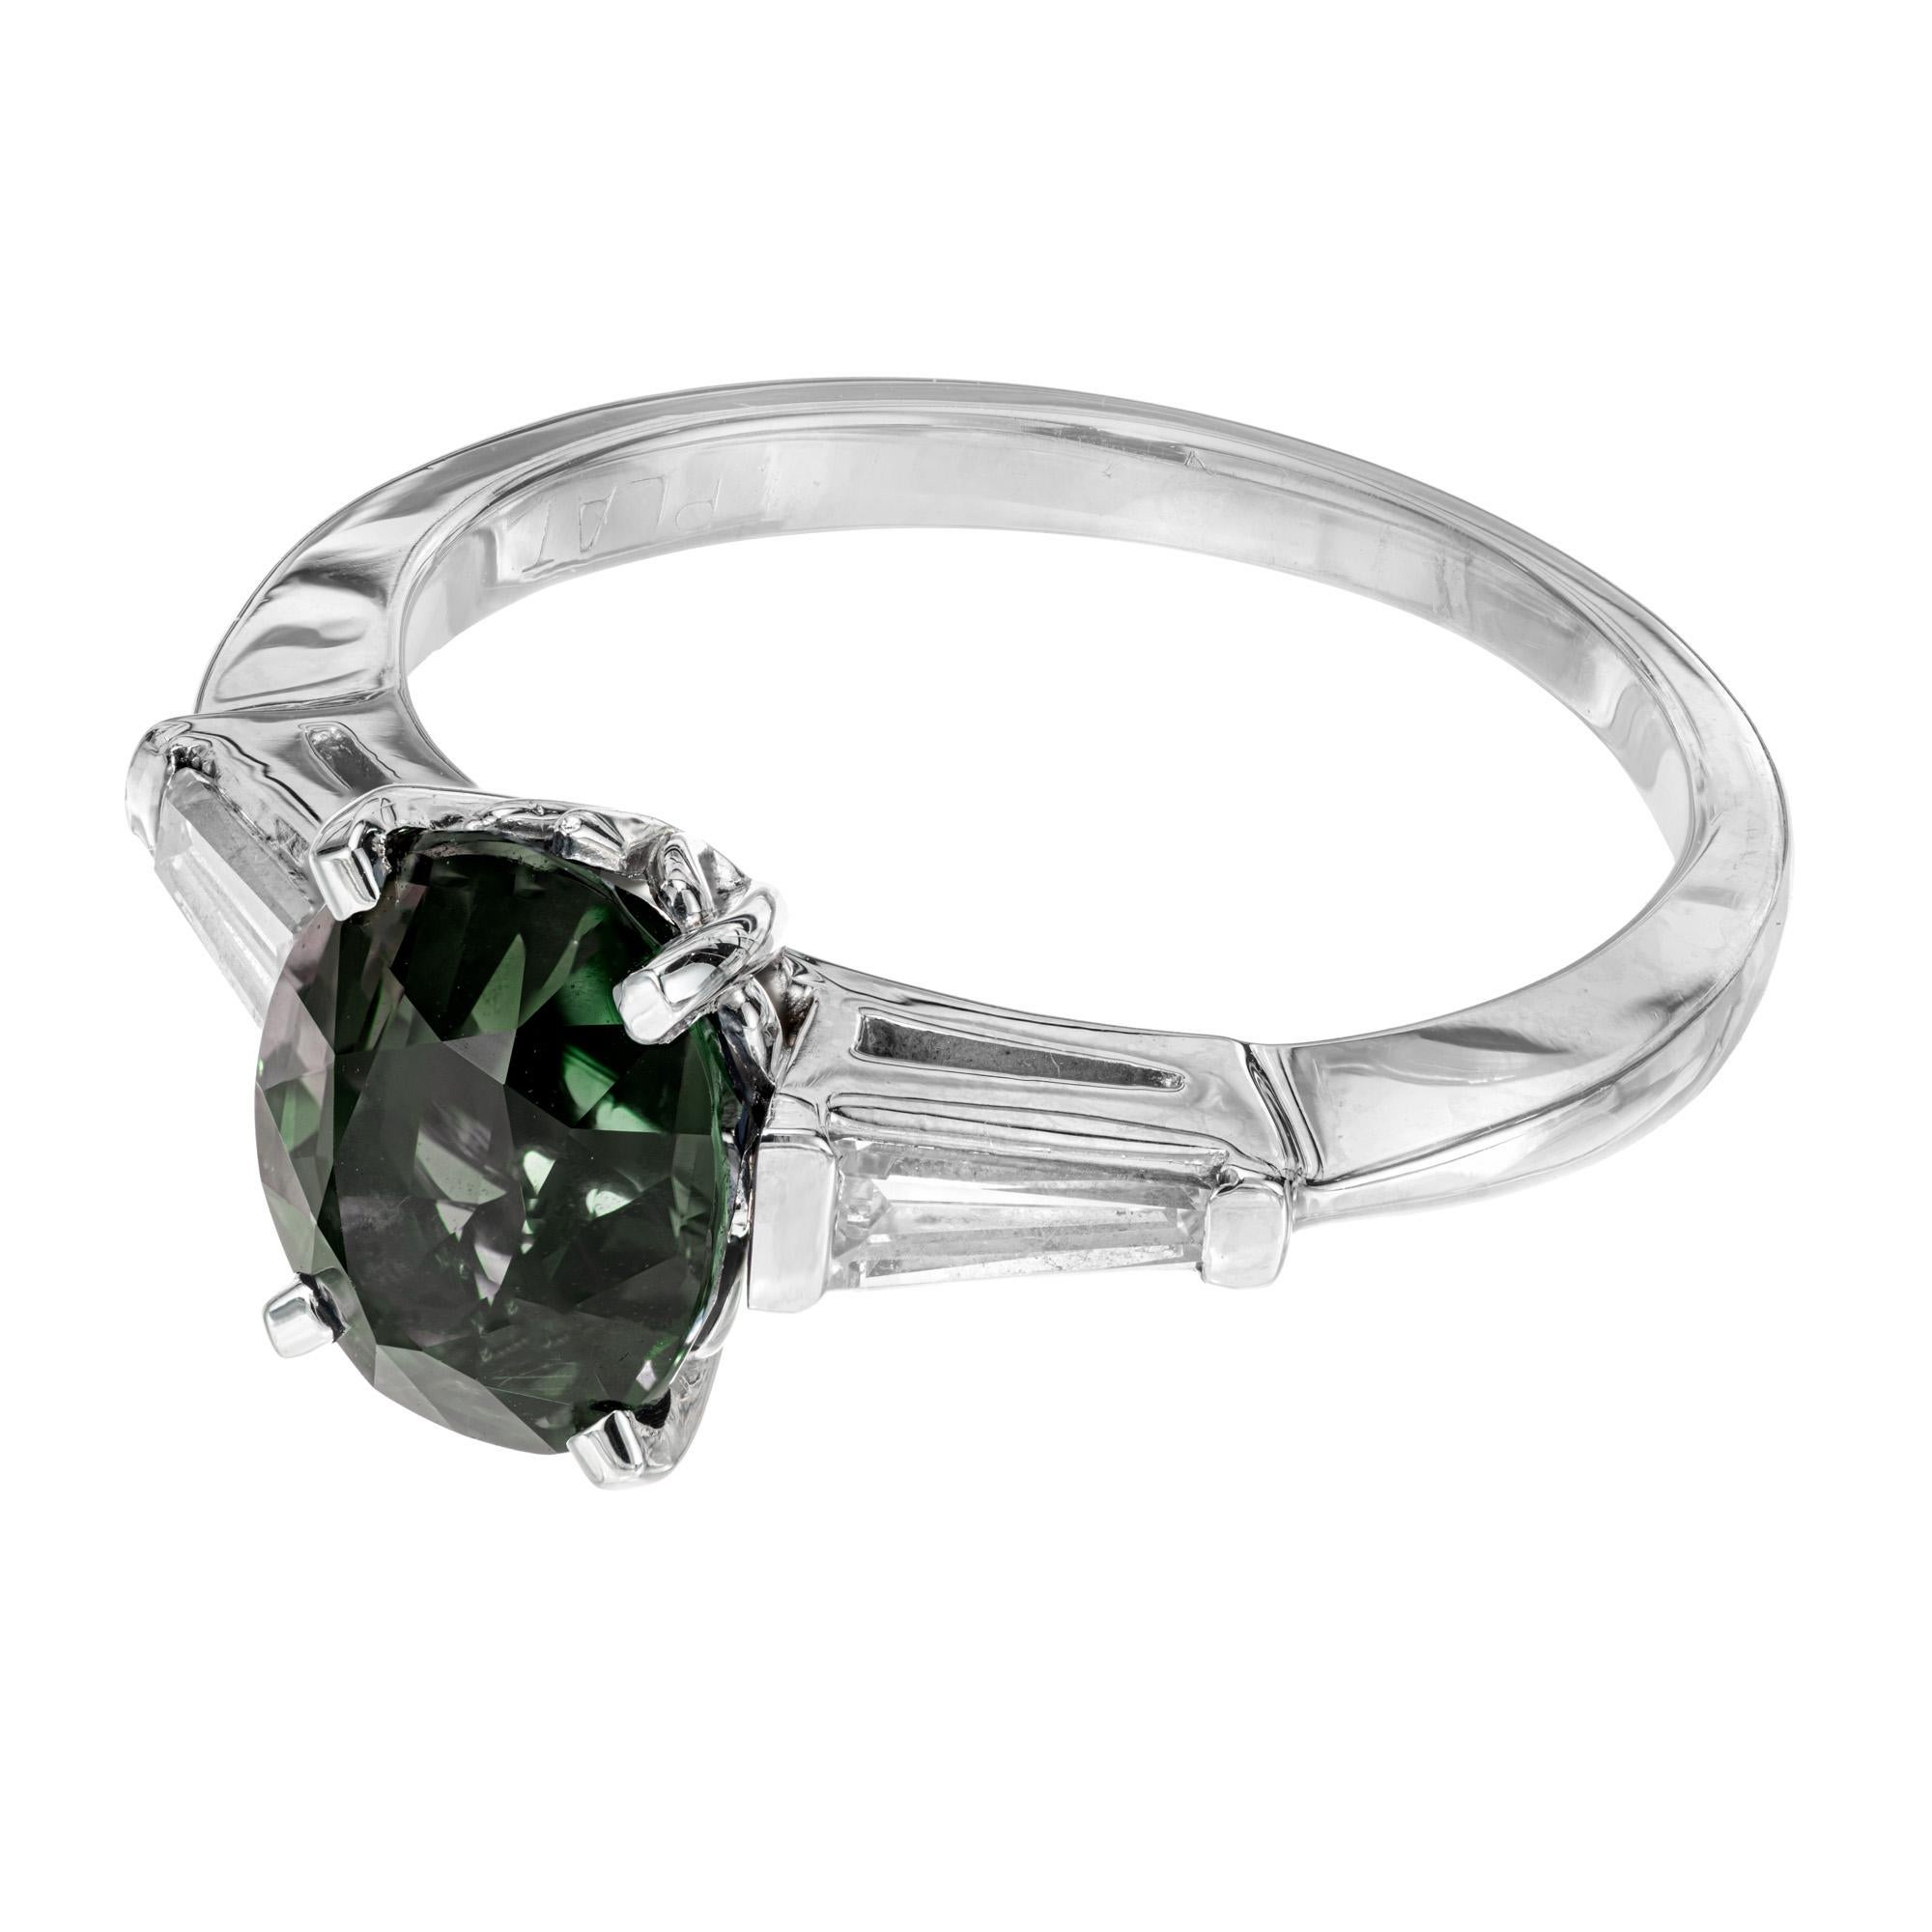 Oval Cut Peter Suchy GIA Certified 2.59 Carat Green Sapphire Diamond Platinum Ring For Sale